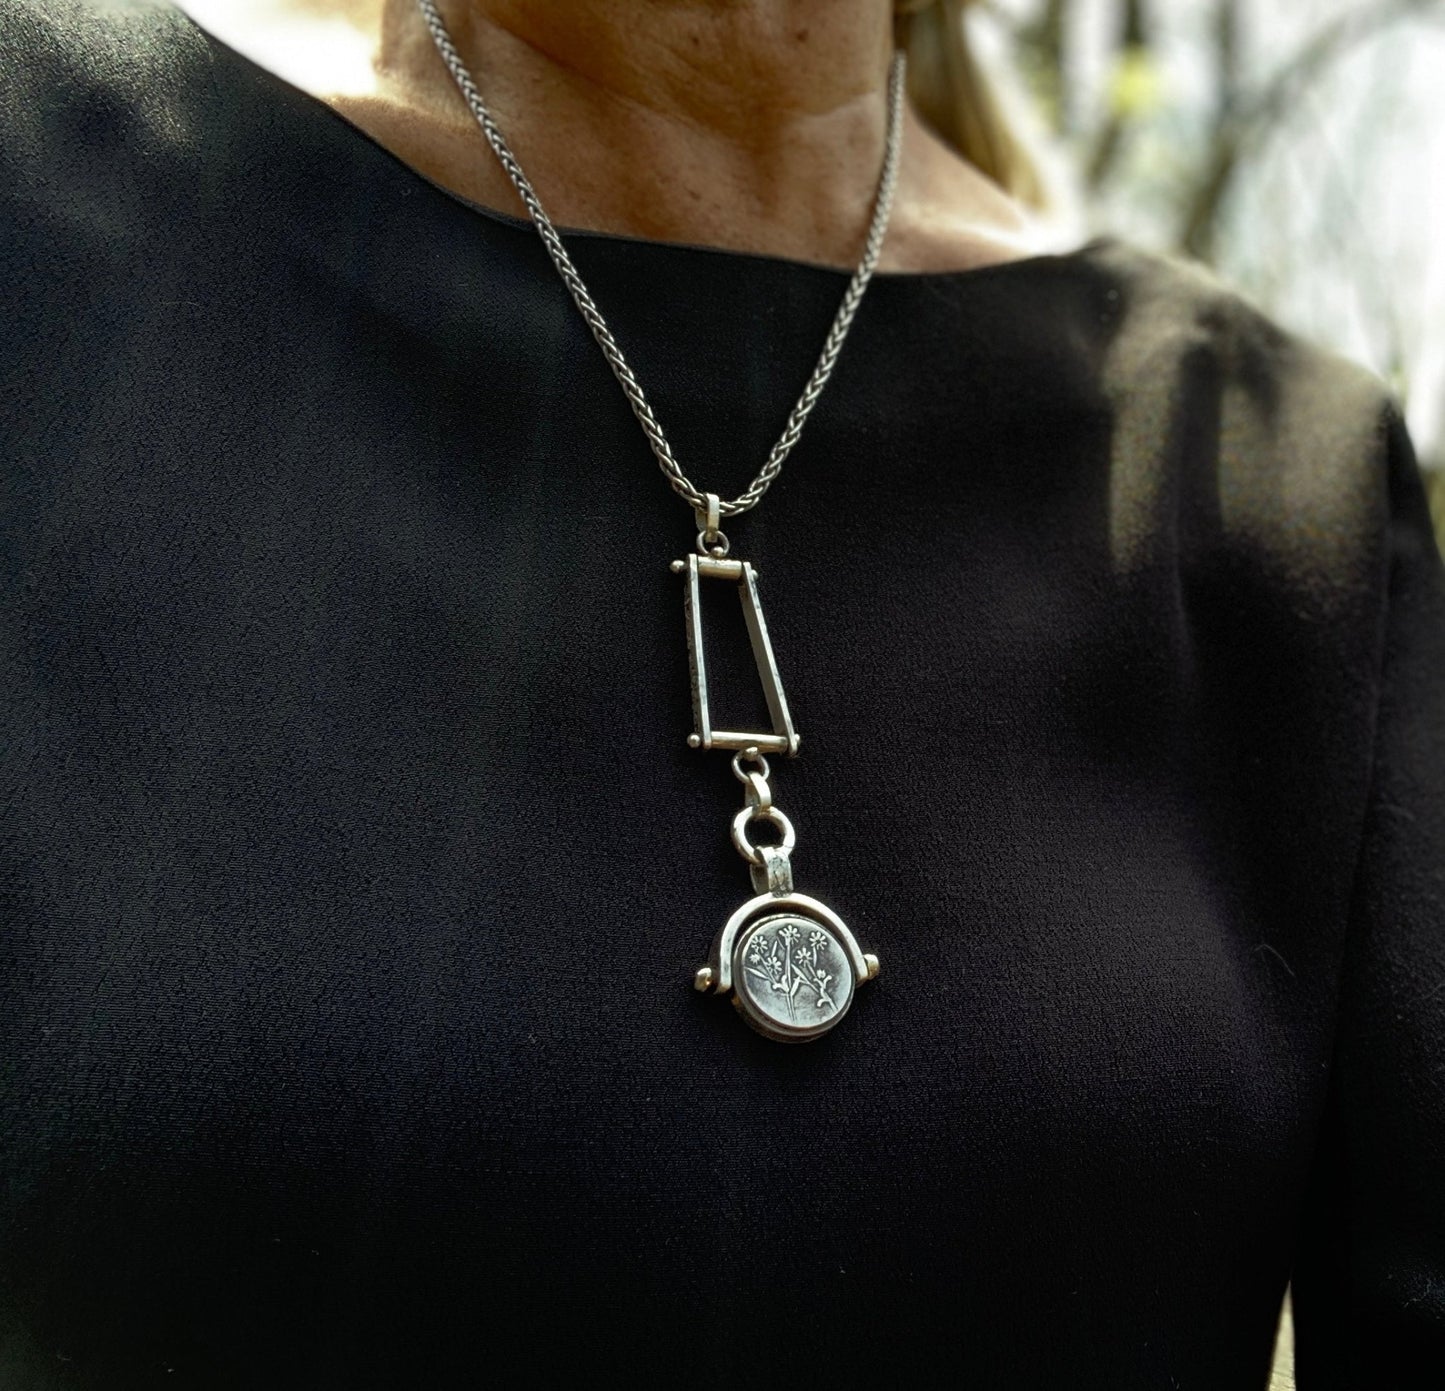 Reversible Sterling Pendant with Trapeze Enhancer and 20” Sterling Chain - Evitts Creek Arts